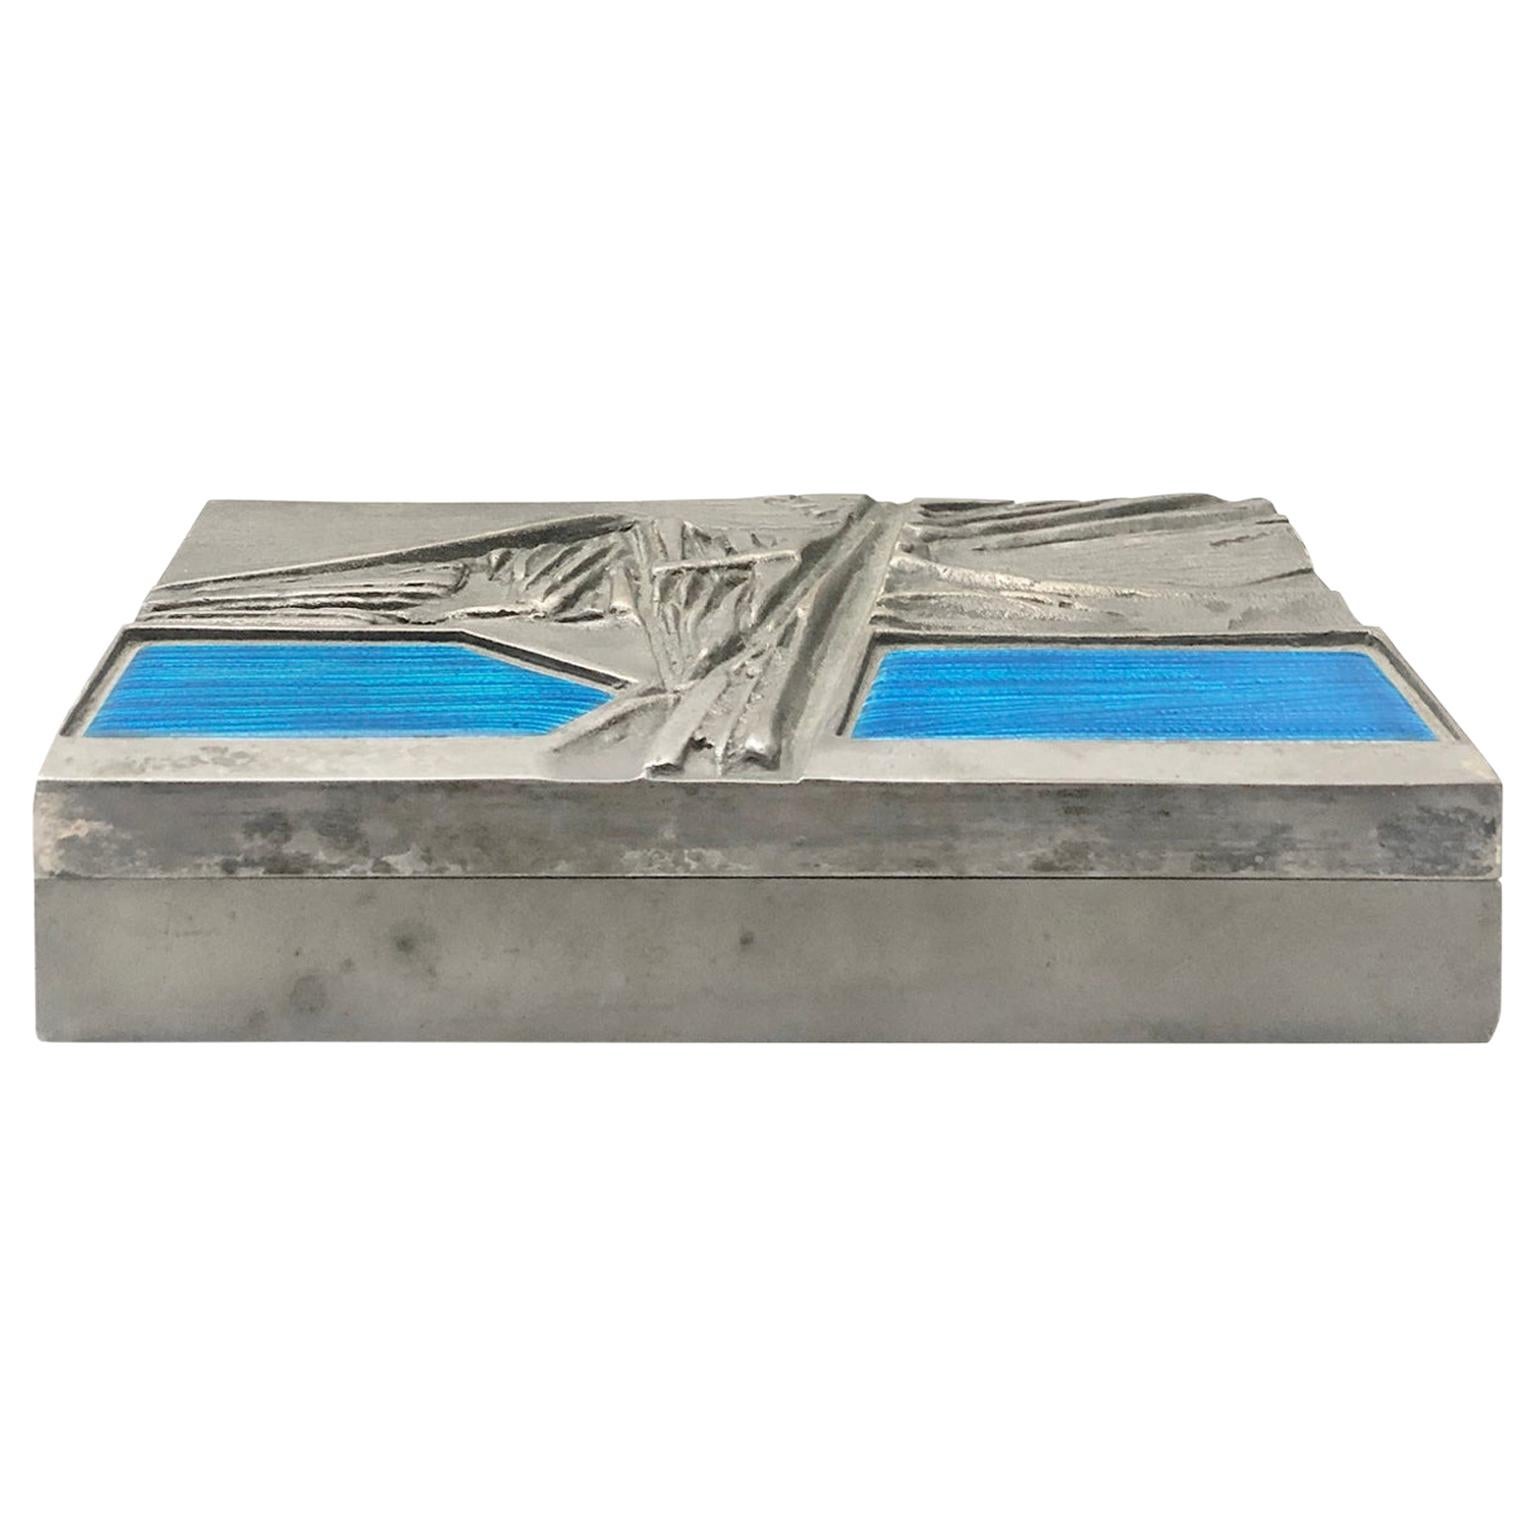 Midcentury Italian Del Campo Engraved Steel Box with Blue Enamel Lid Detail For Sale